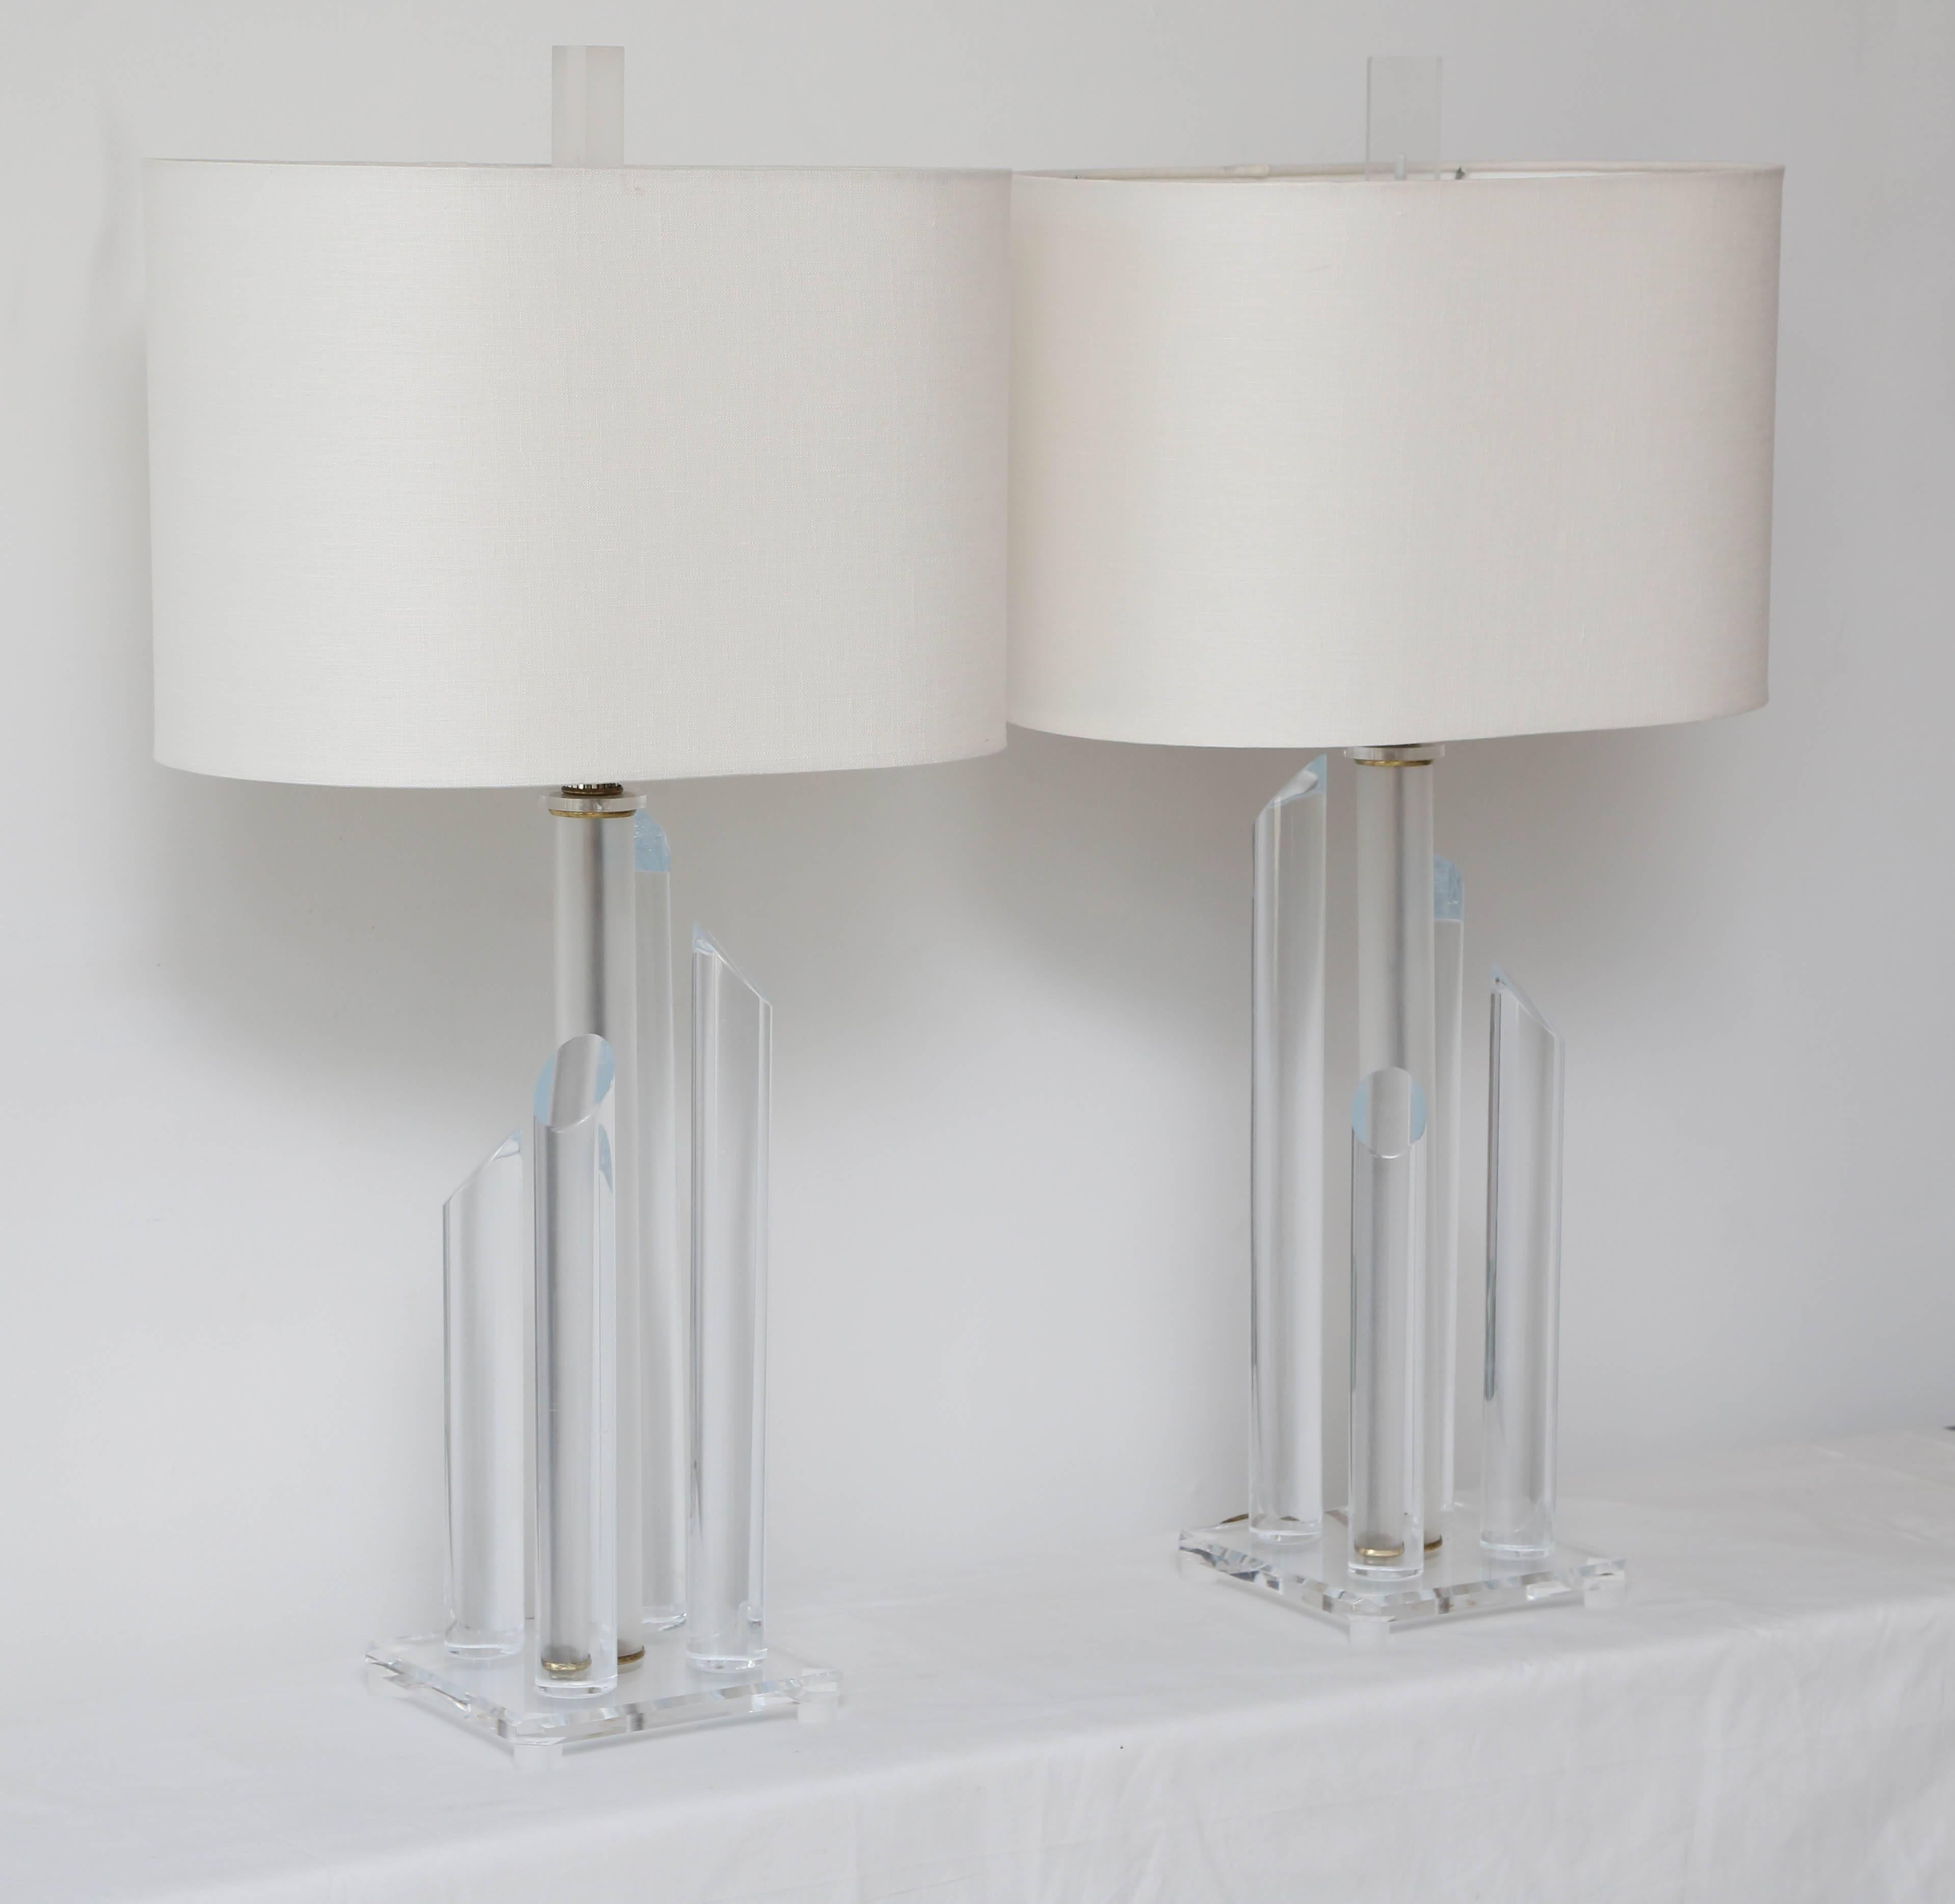 Pair of Mid-Century Modern Lucite lamps with asymmetrical columns and white linen shades.